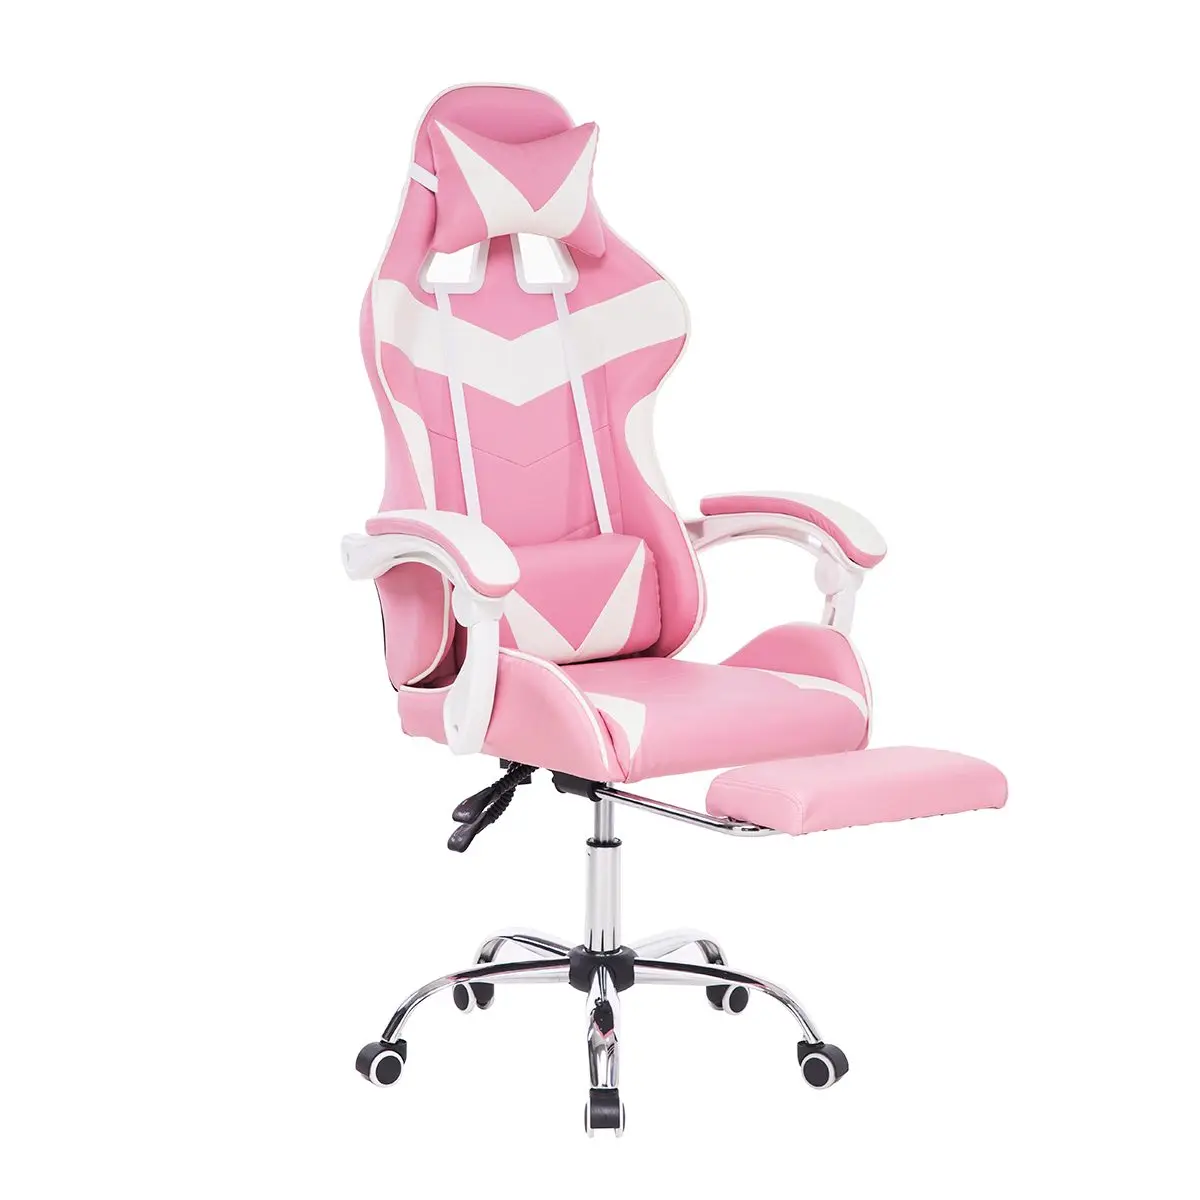 New Innovation Customize Product Pu Leather Modern Swivel Pink Neck Pillow Lumbar Support Racing Gaming Chair Buy Gaming Chair Computer Gamer Desk Chair Household Gaming Chair Product On Alibaba Com